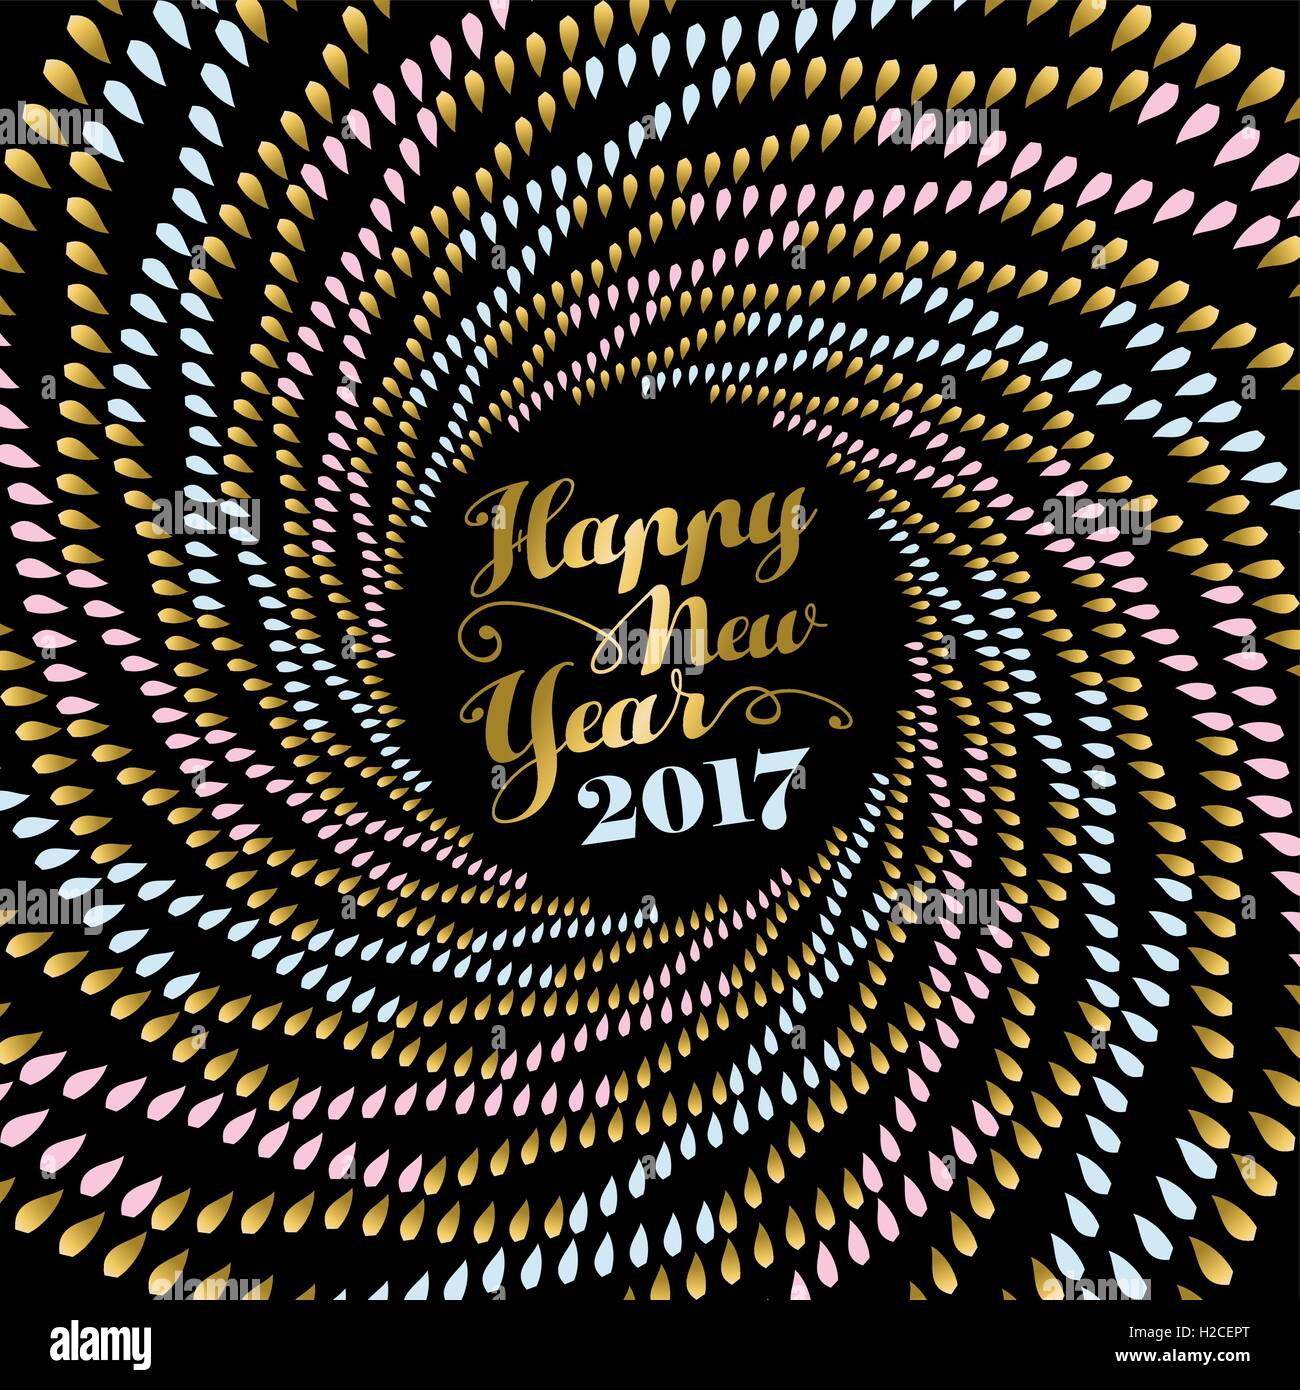 Happy New Year 2017, holiday design in gold color with abstract mandala art over black background. EPS10 vector. Stock Vector